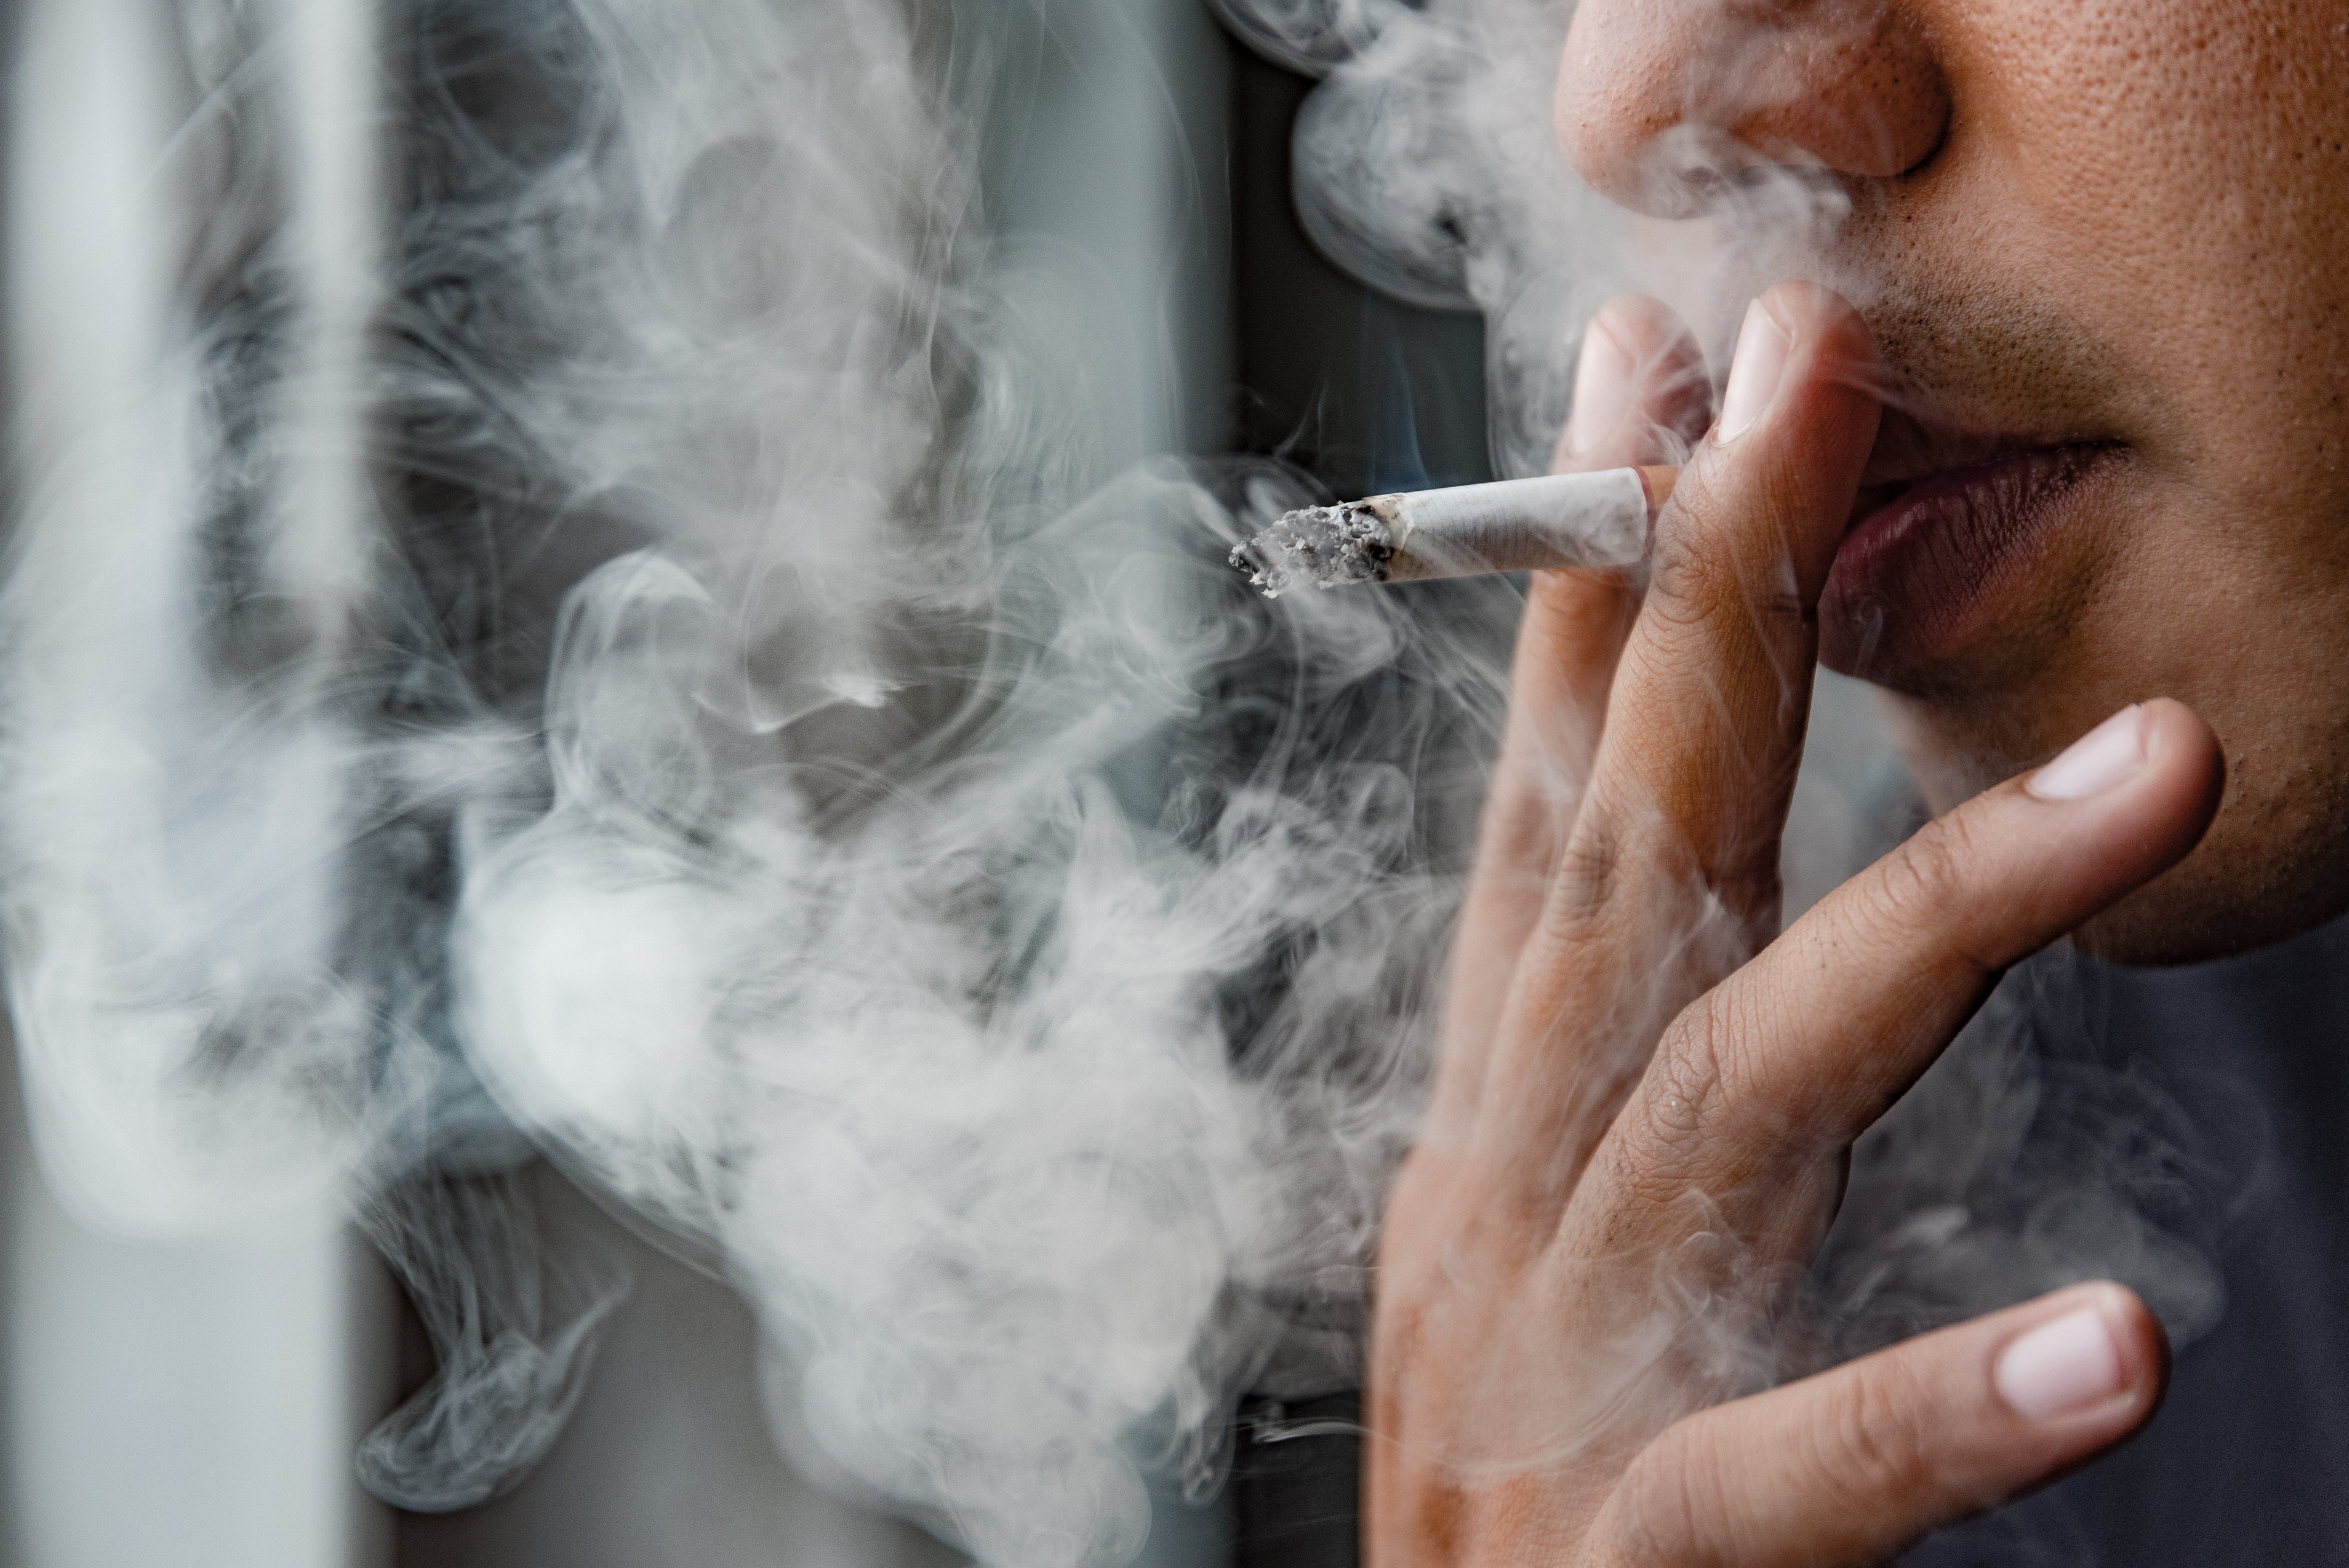 Smoking is linked to poverty and is causing more cancers in poorer communities